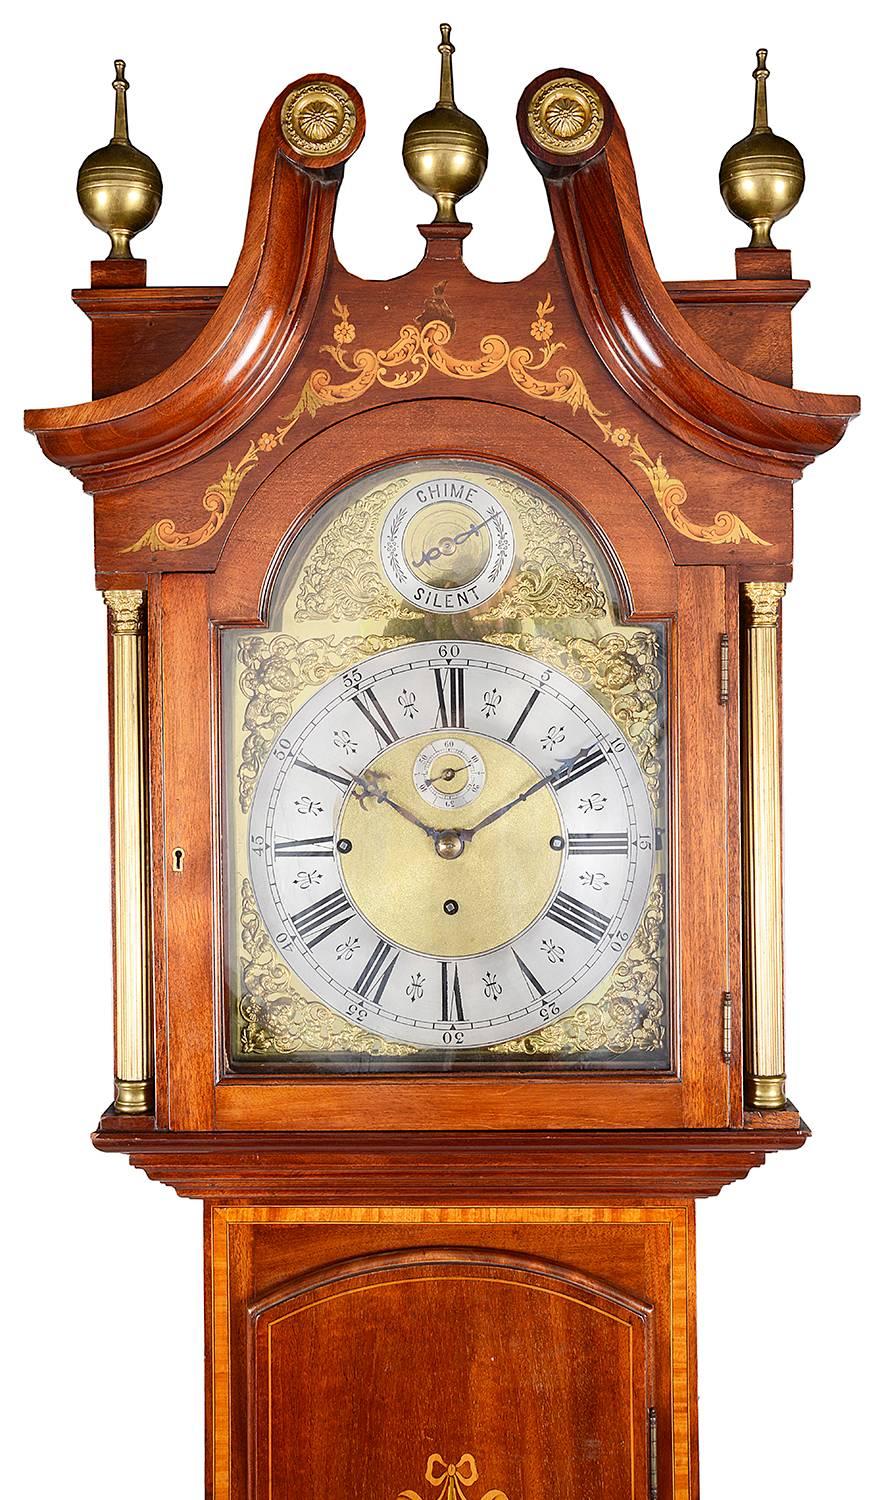 A good quality Edwardian period mahogany longcase clock with a Westminster and Whittington chime on the hour. Having an arched brass dial face, a swan neck pediment to the hood with brass finials and boxwood inlaid decoration to the case.